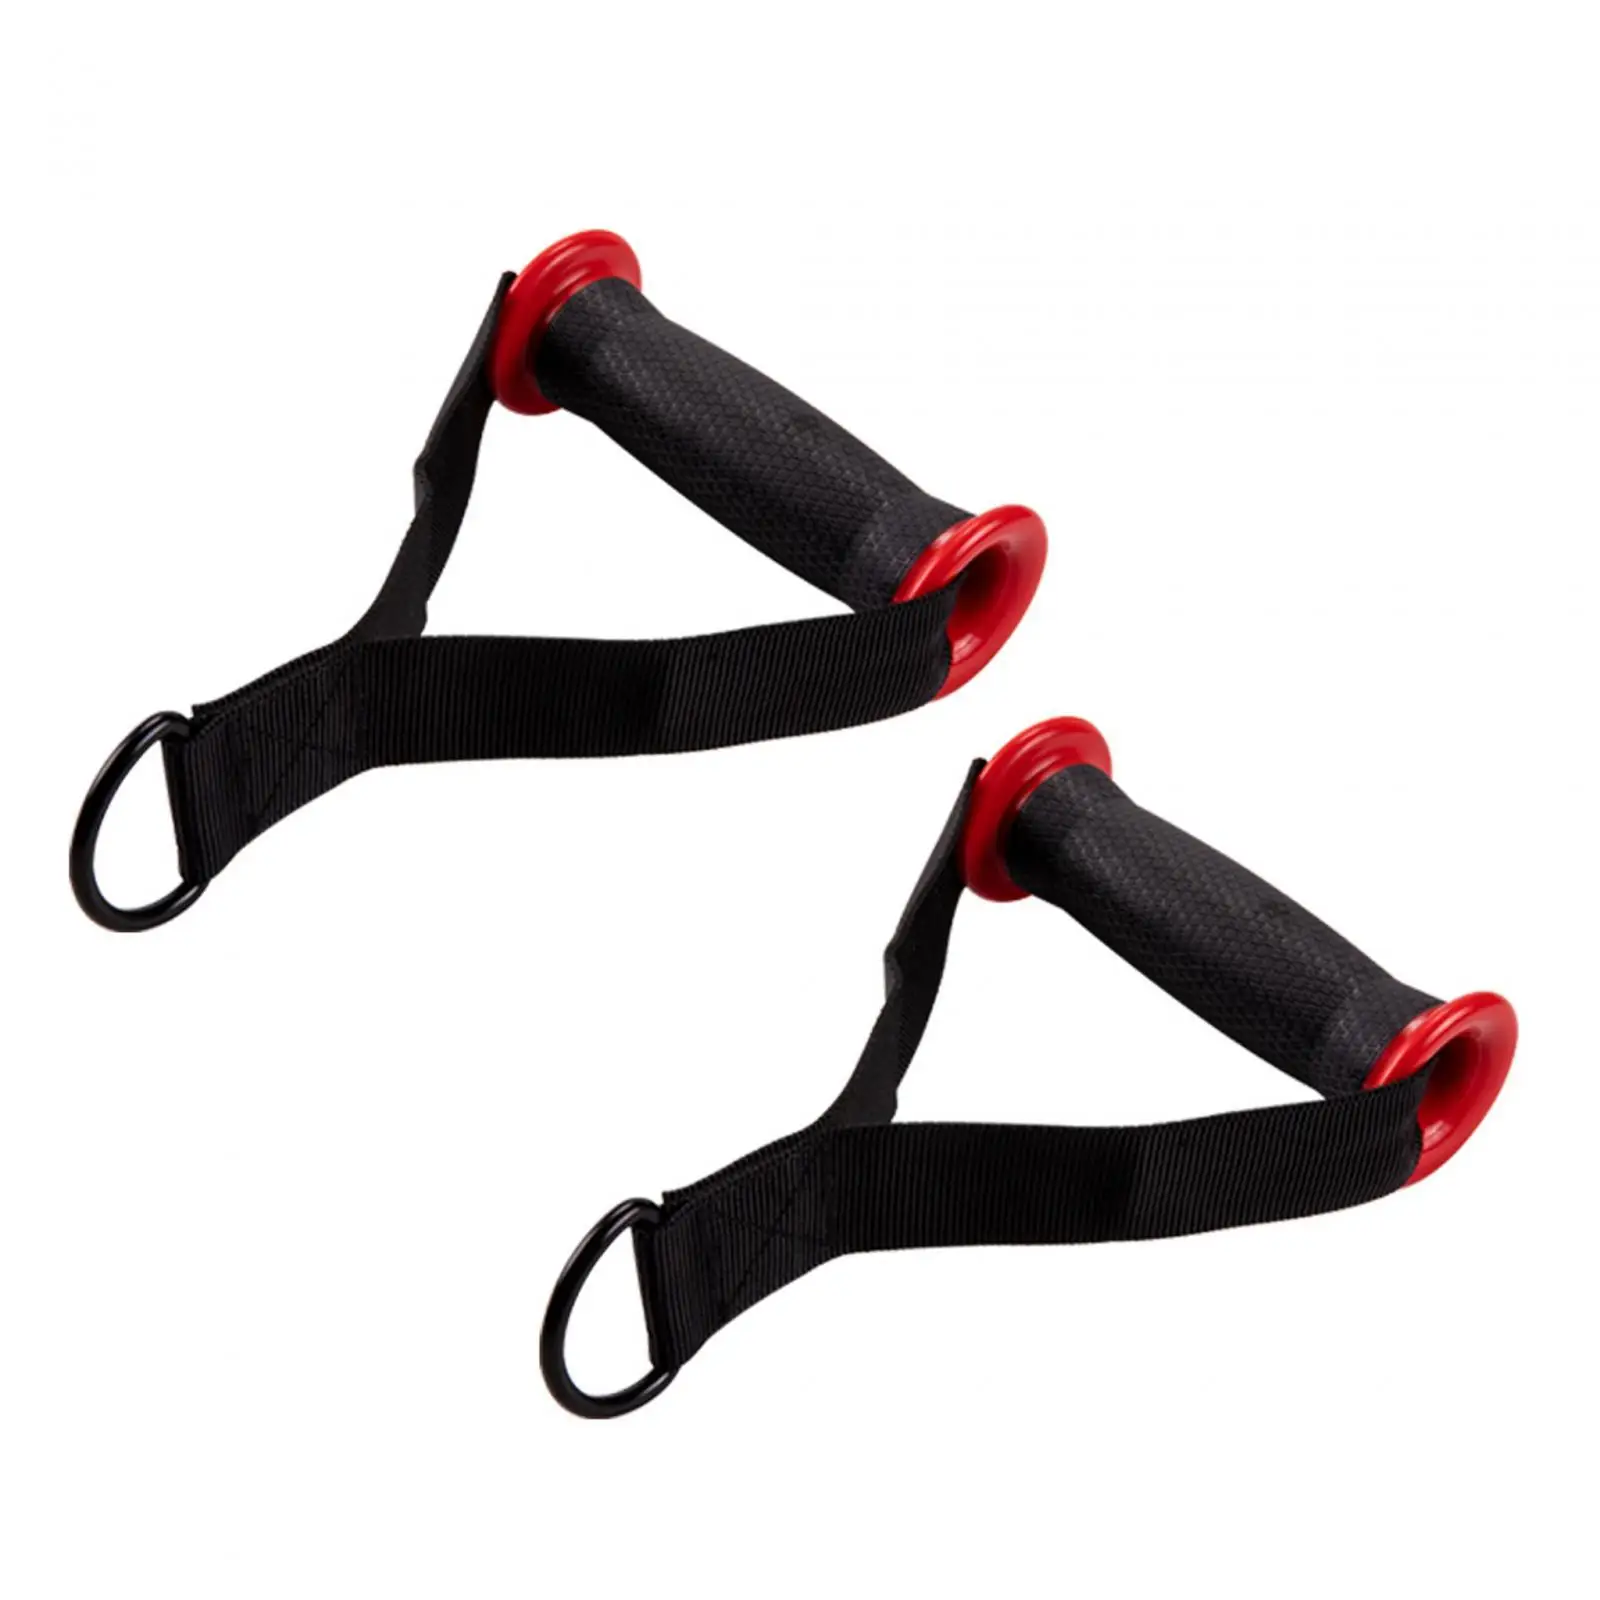 2 Pieces Gym Handle Push Pull Attachment Stirrup Gymnastics Hanging Heavy Duty Nylon Webbing Cable Attachment Pull Band Handles